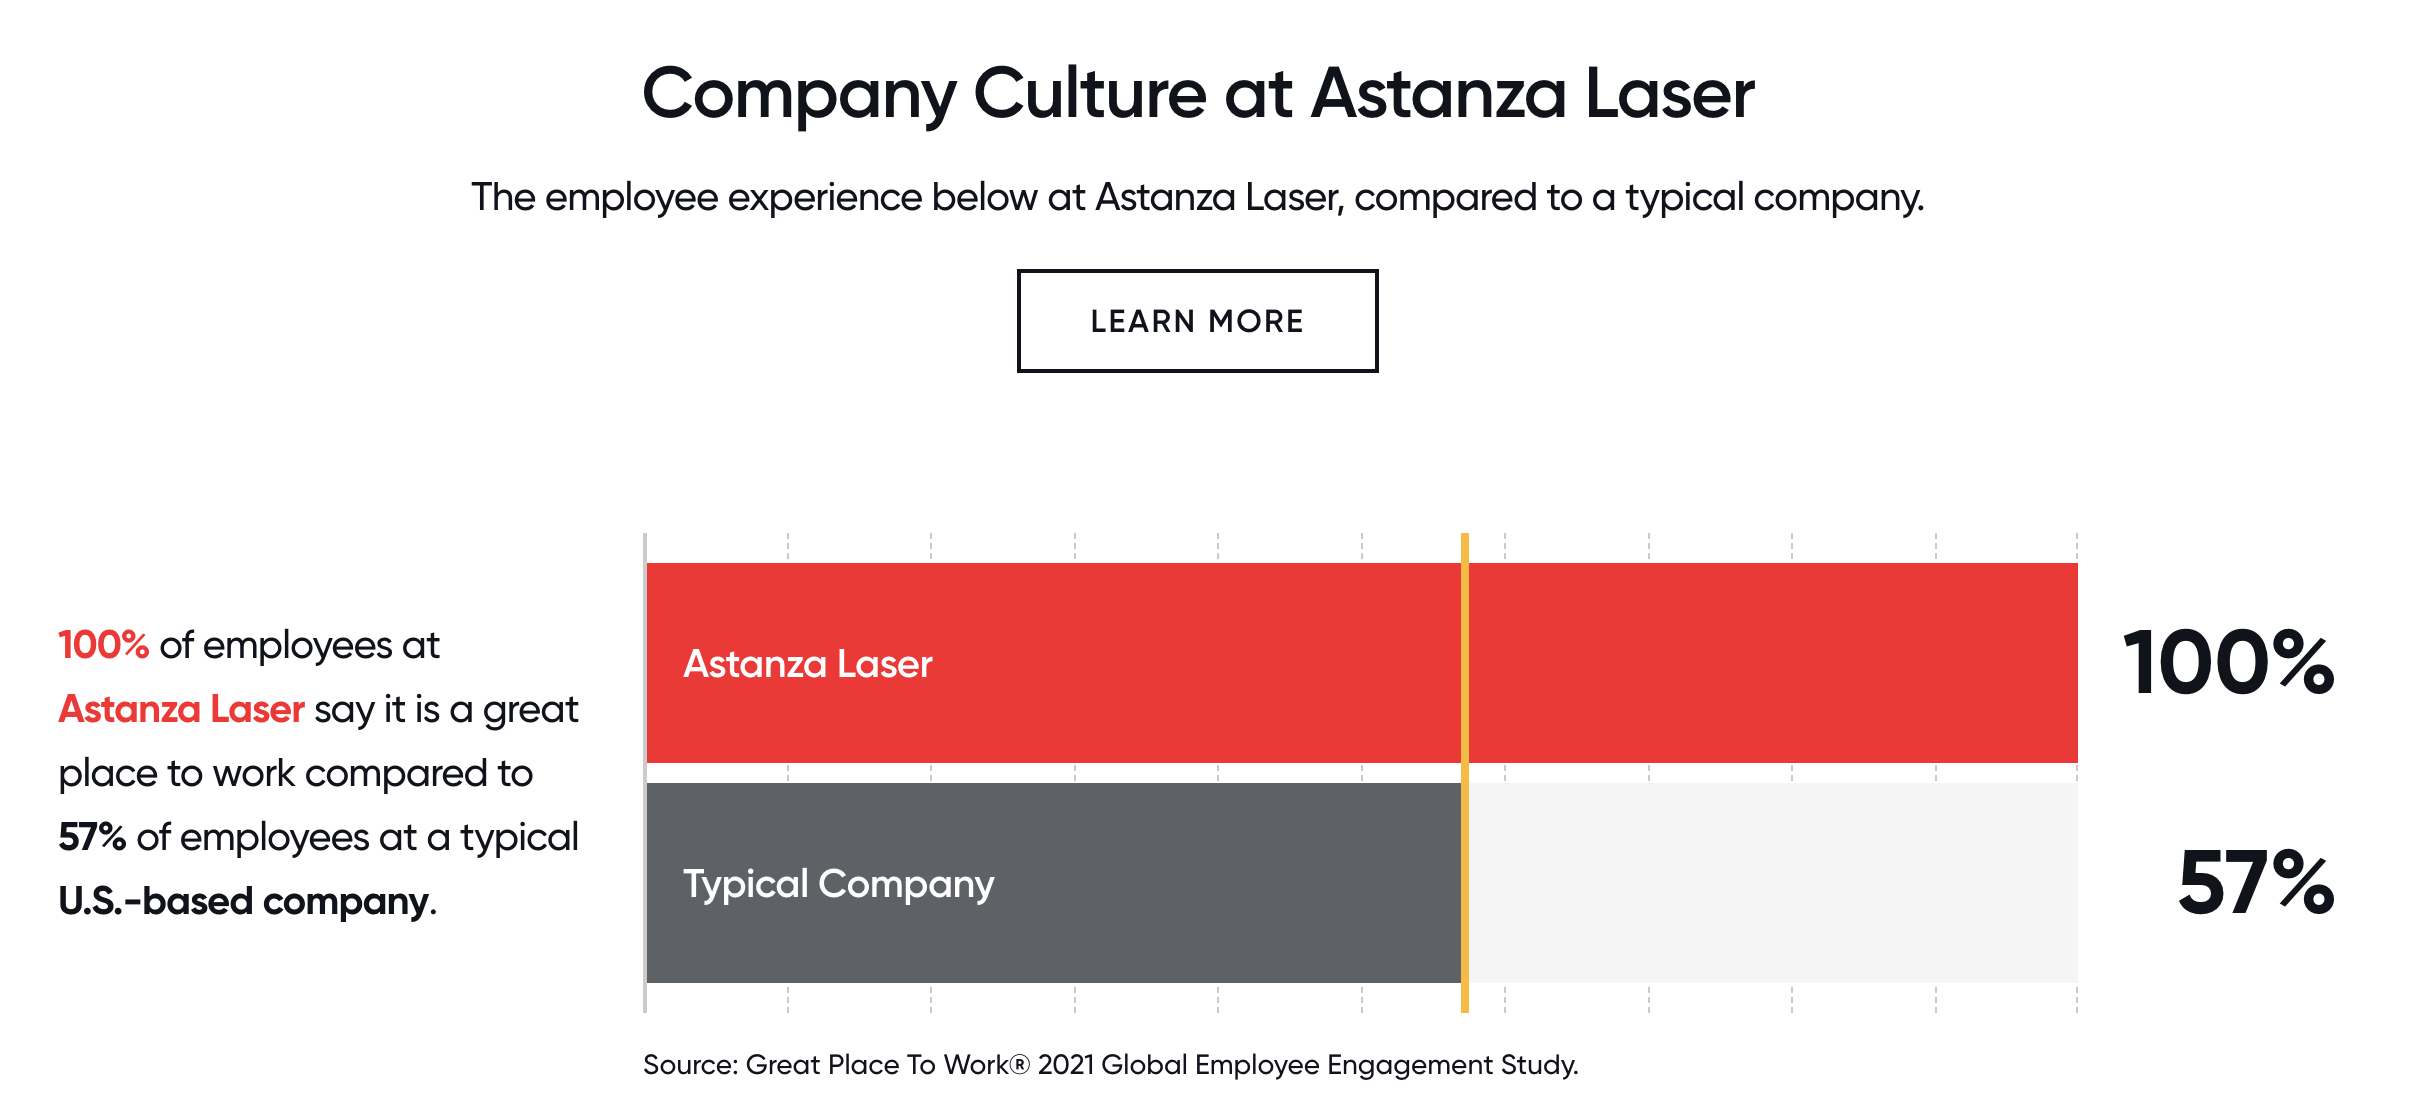 one hundred percent of astanza laser employees say it is a great place to work. astanza's company culture helped them earn great place to work certification.